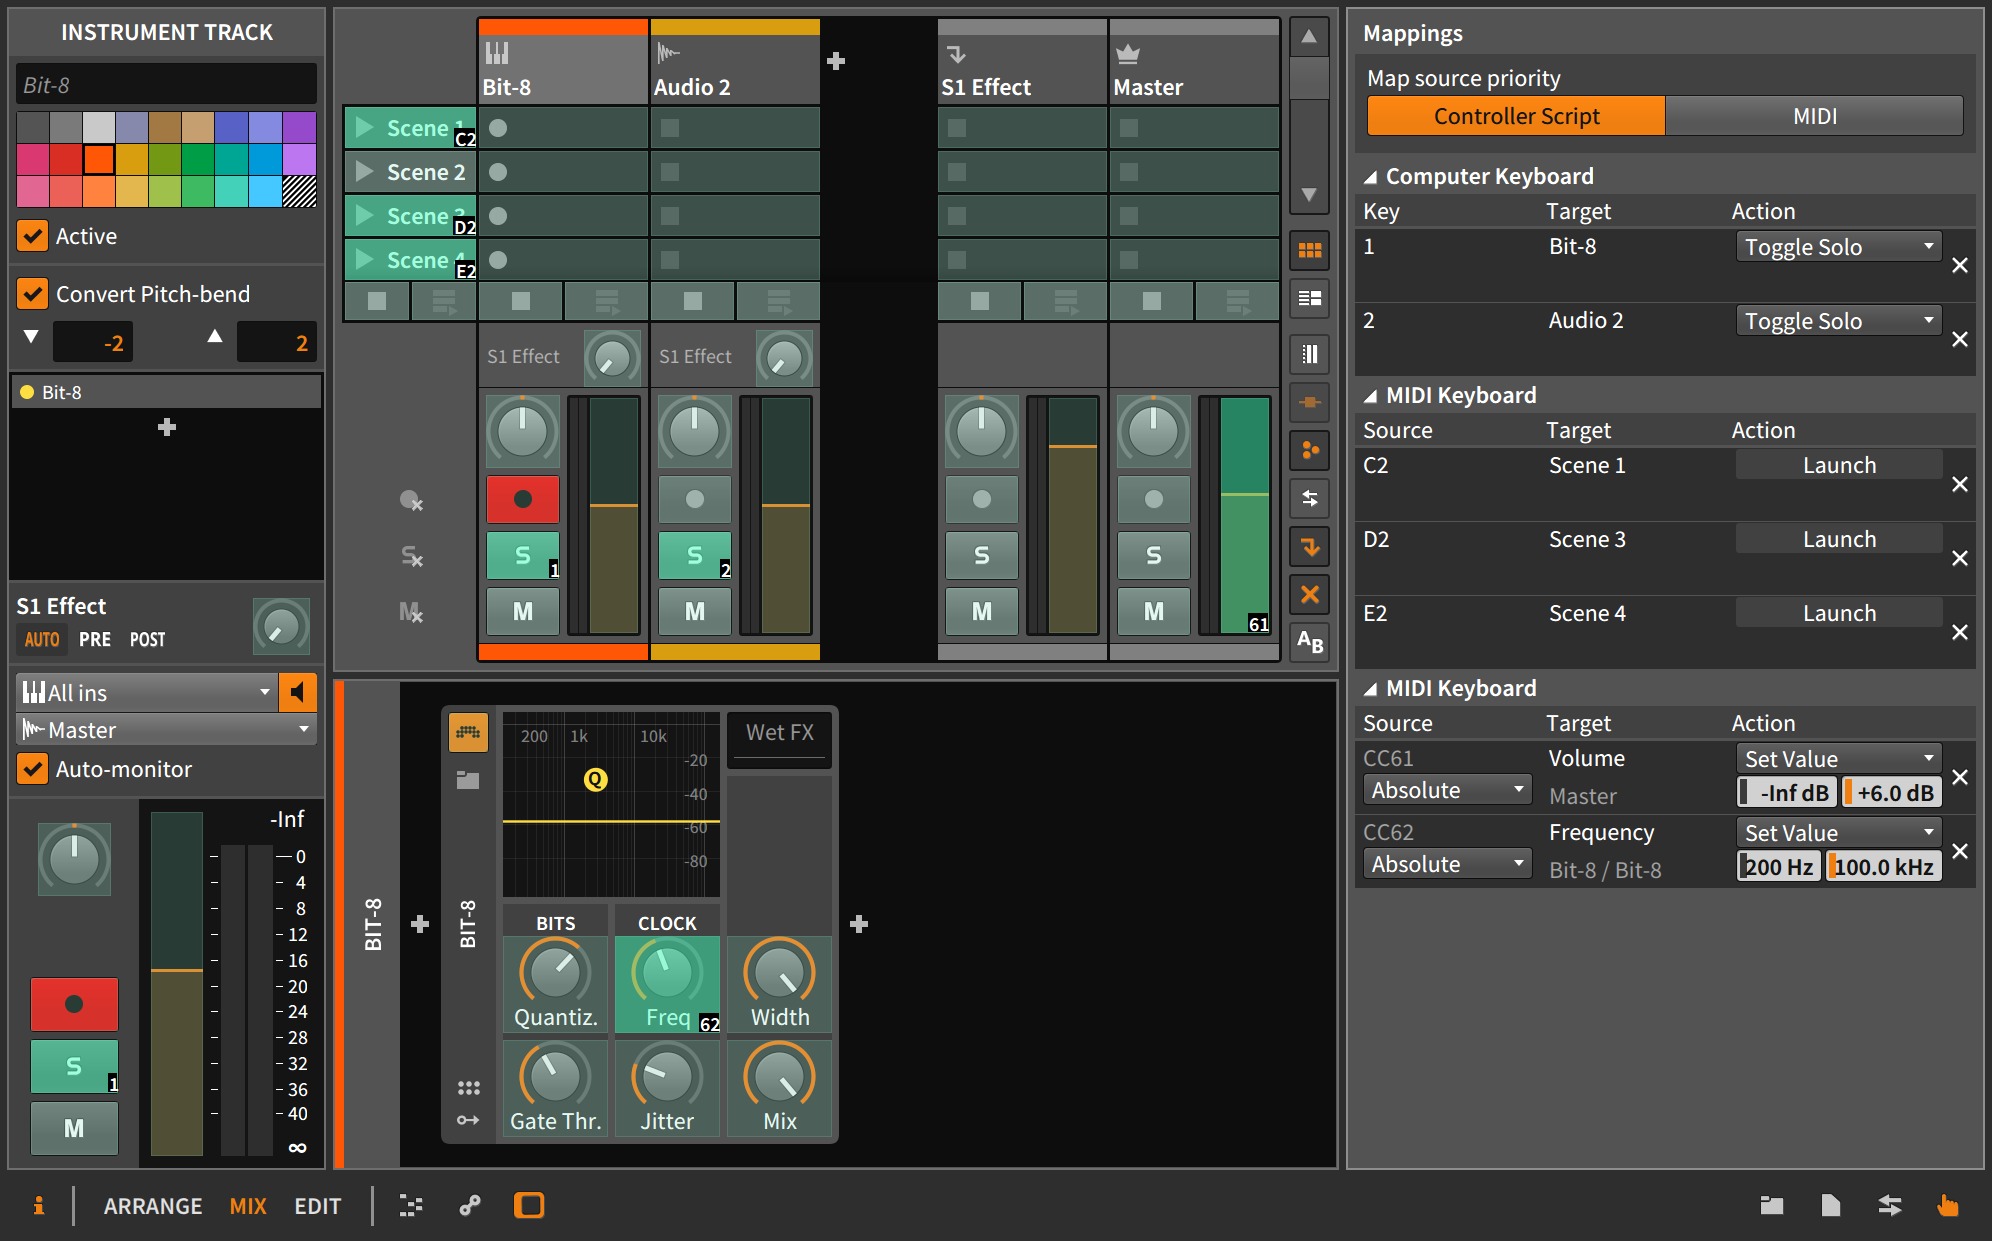 How To Set Ranges On MIDI Mapping Assignment In Bitwig